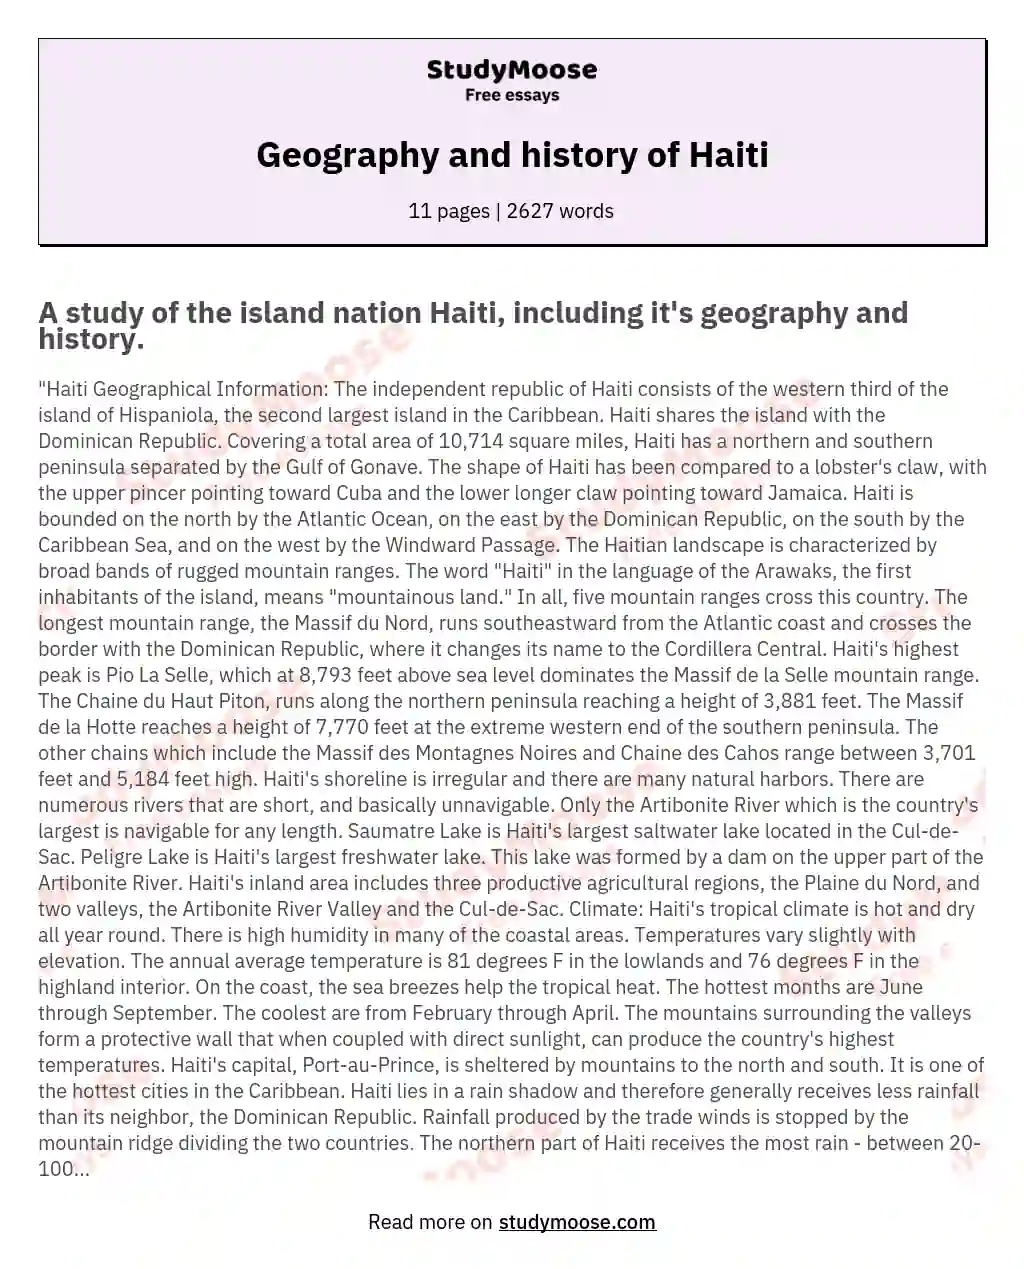 Geography and history of Haiti essay